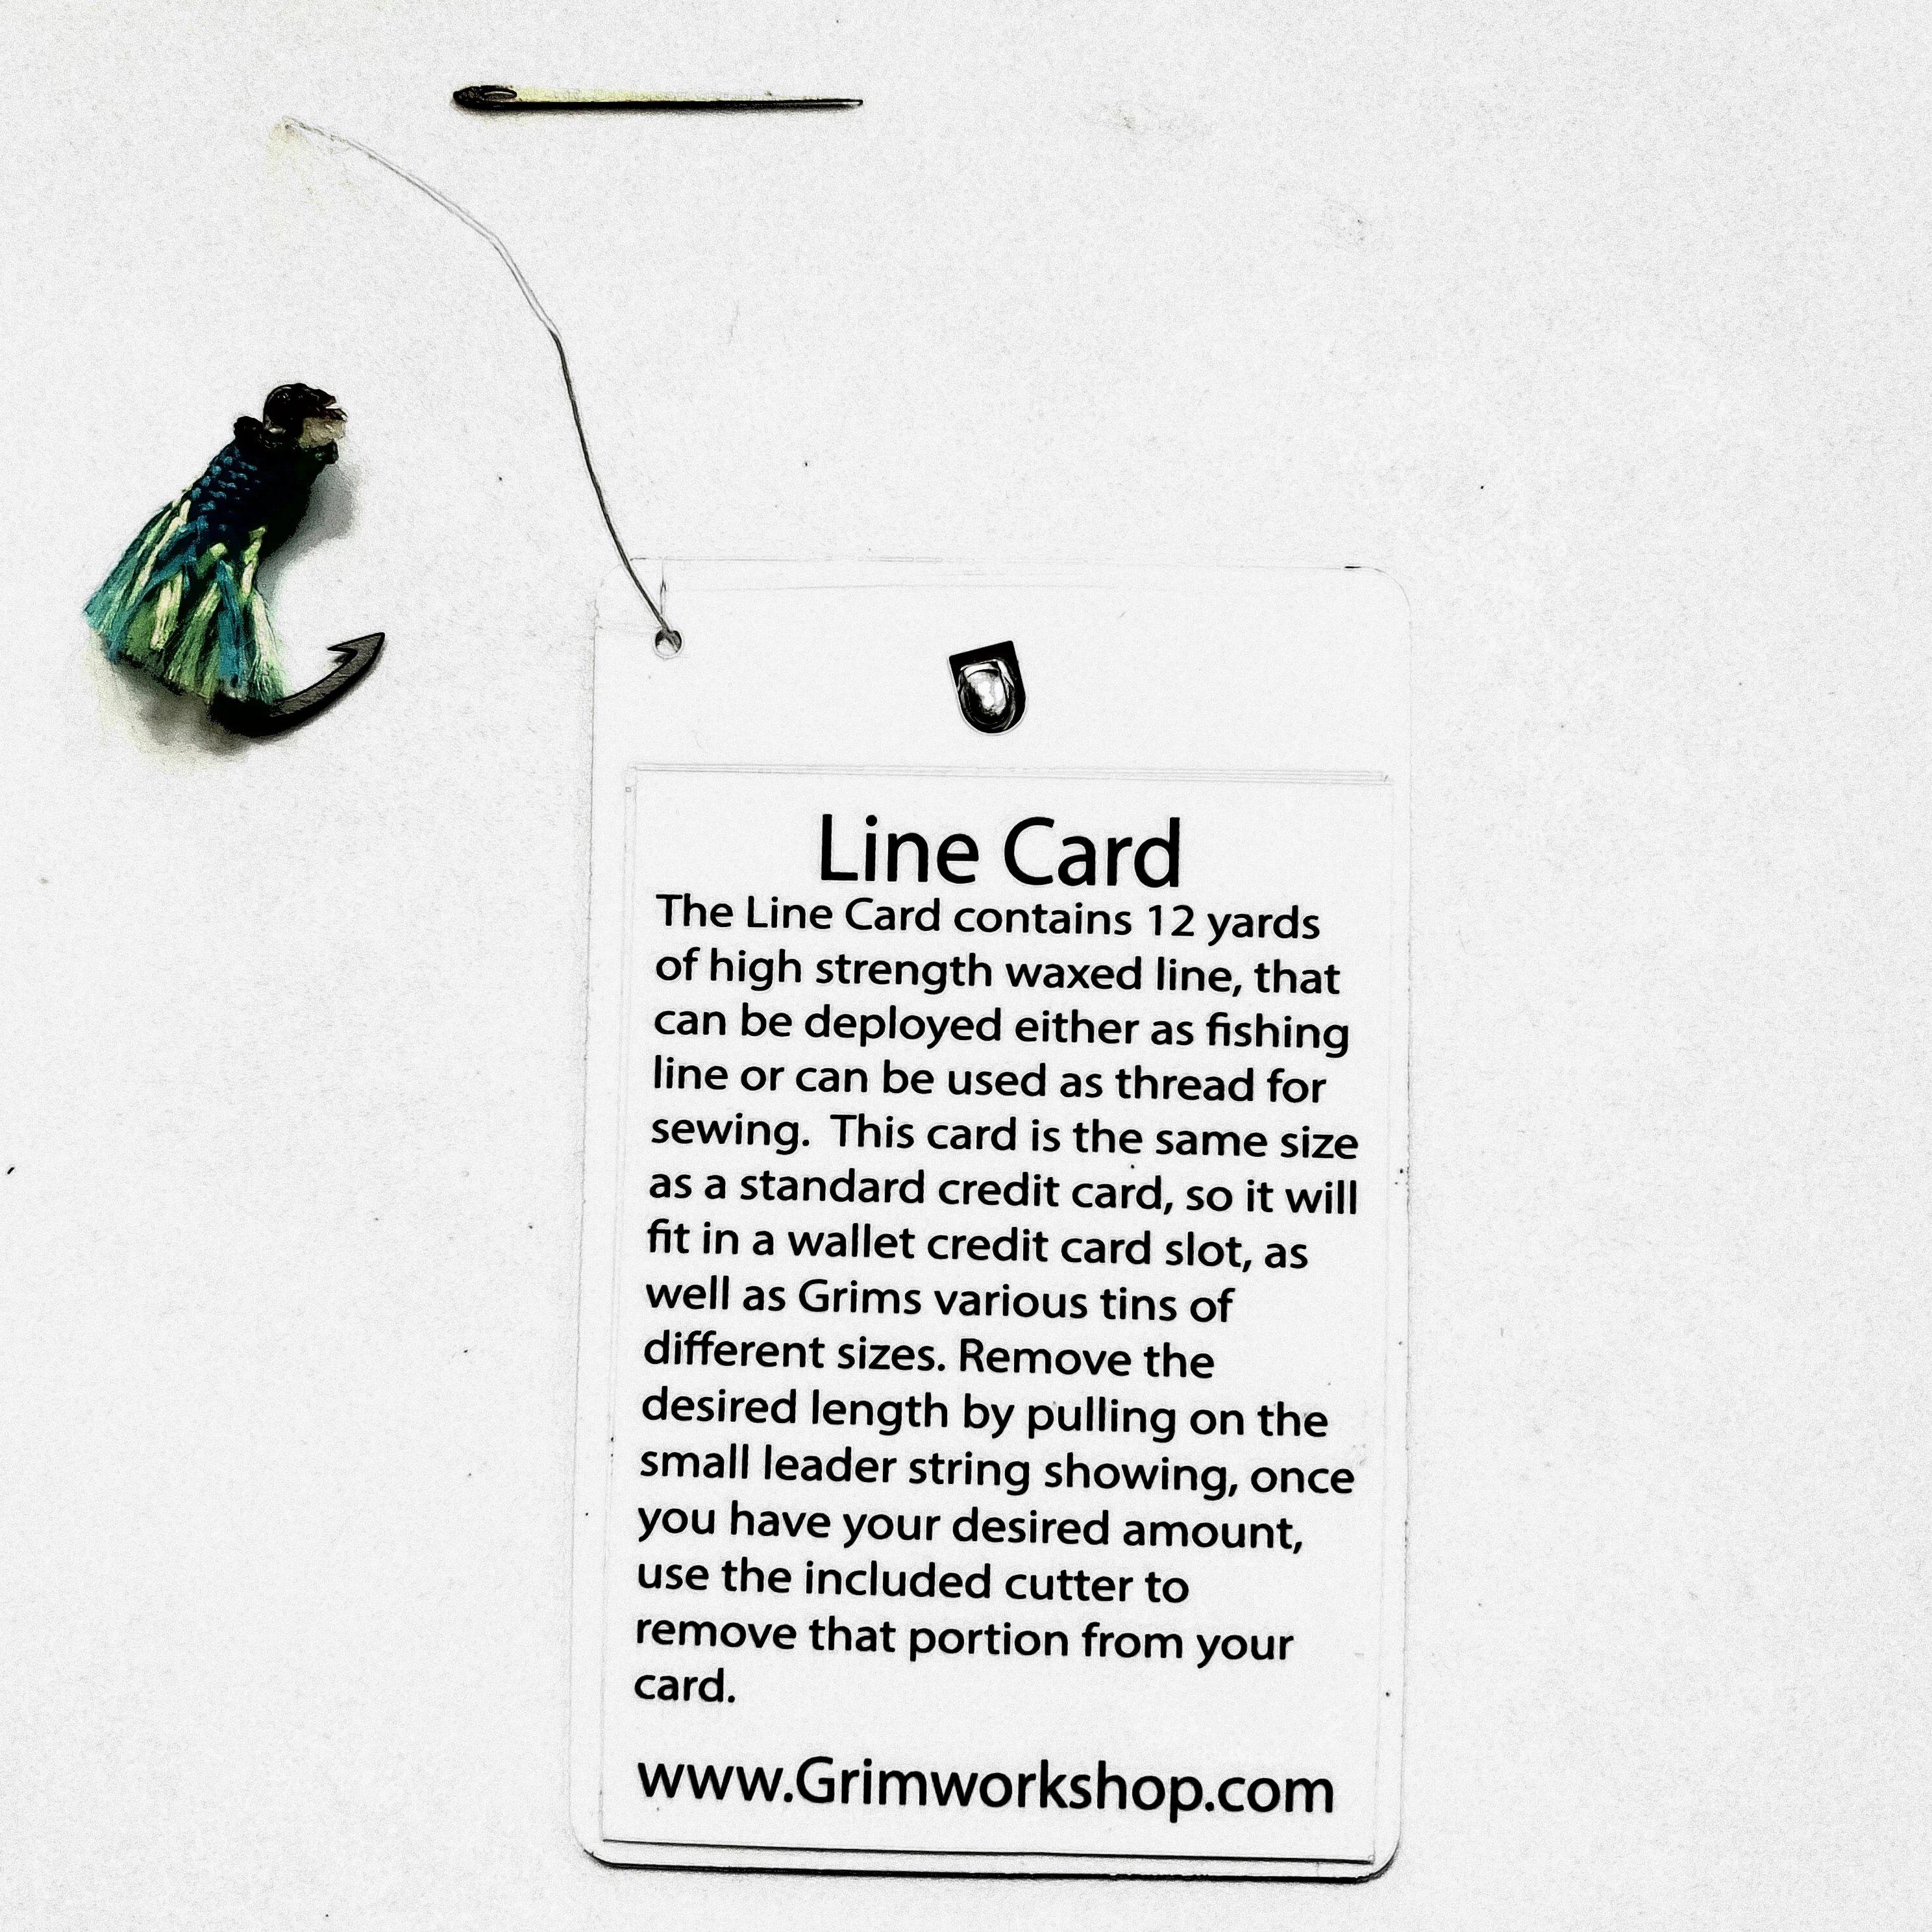 what is the line card, credit card line storage containing 35 feet of survival cord that's waxed, and able to be used to fish, or repair gear.